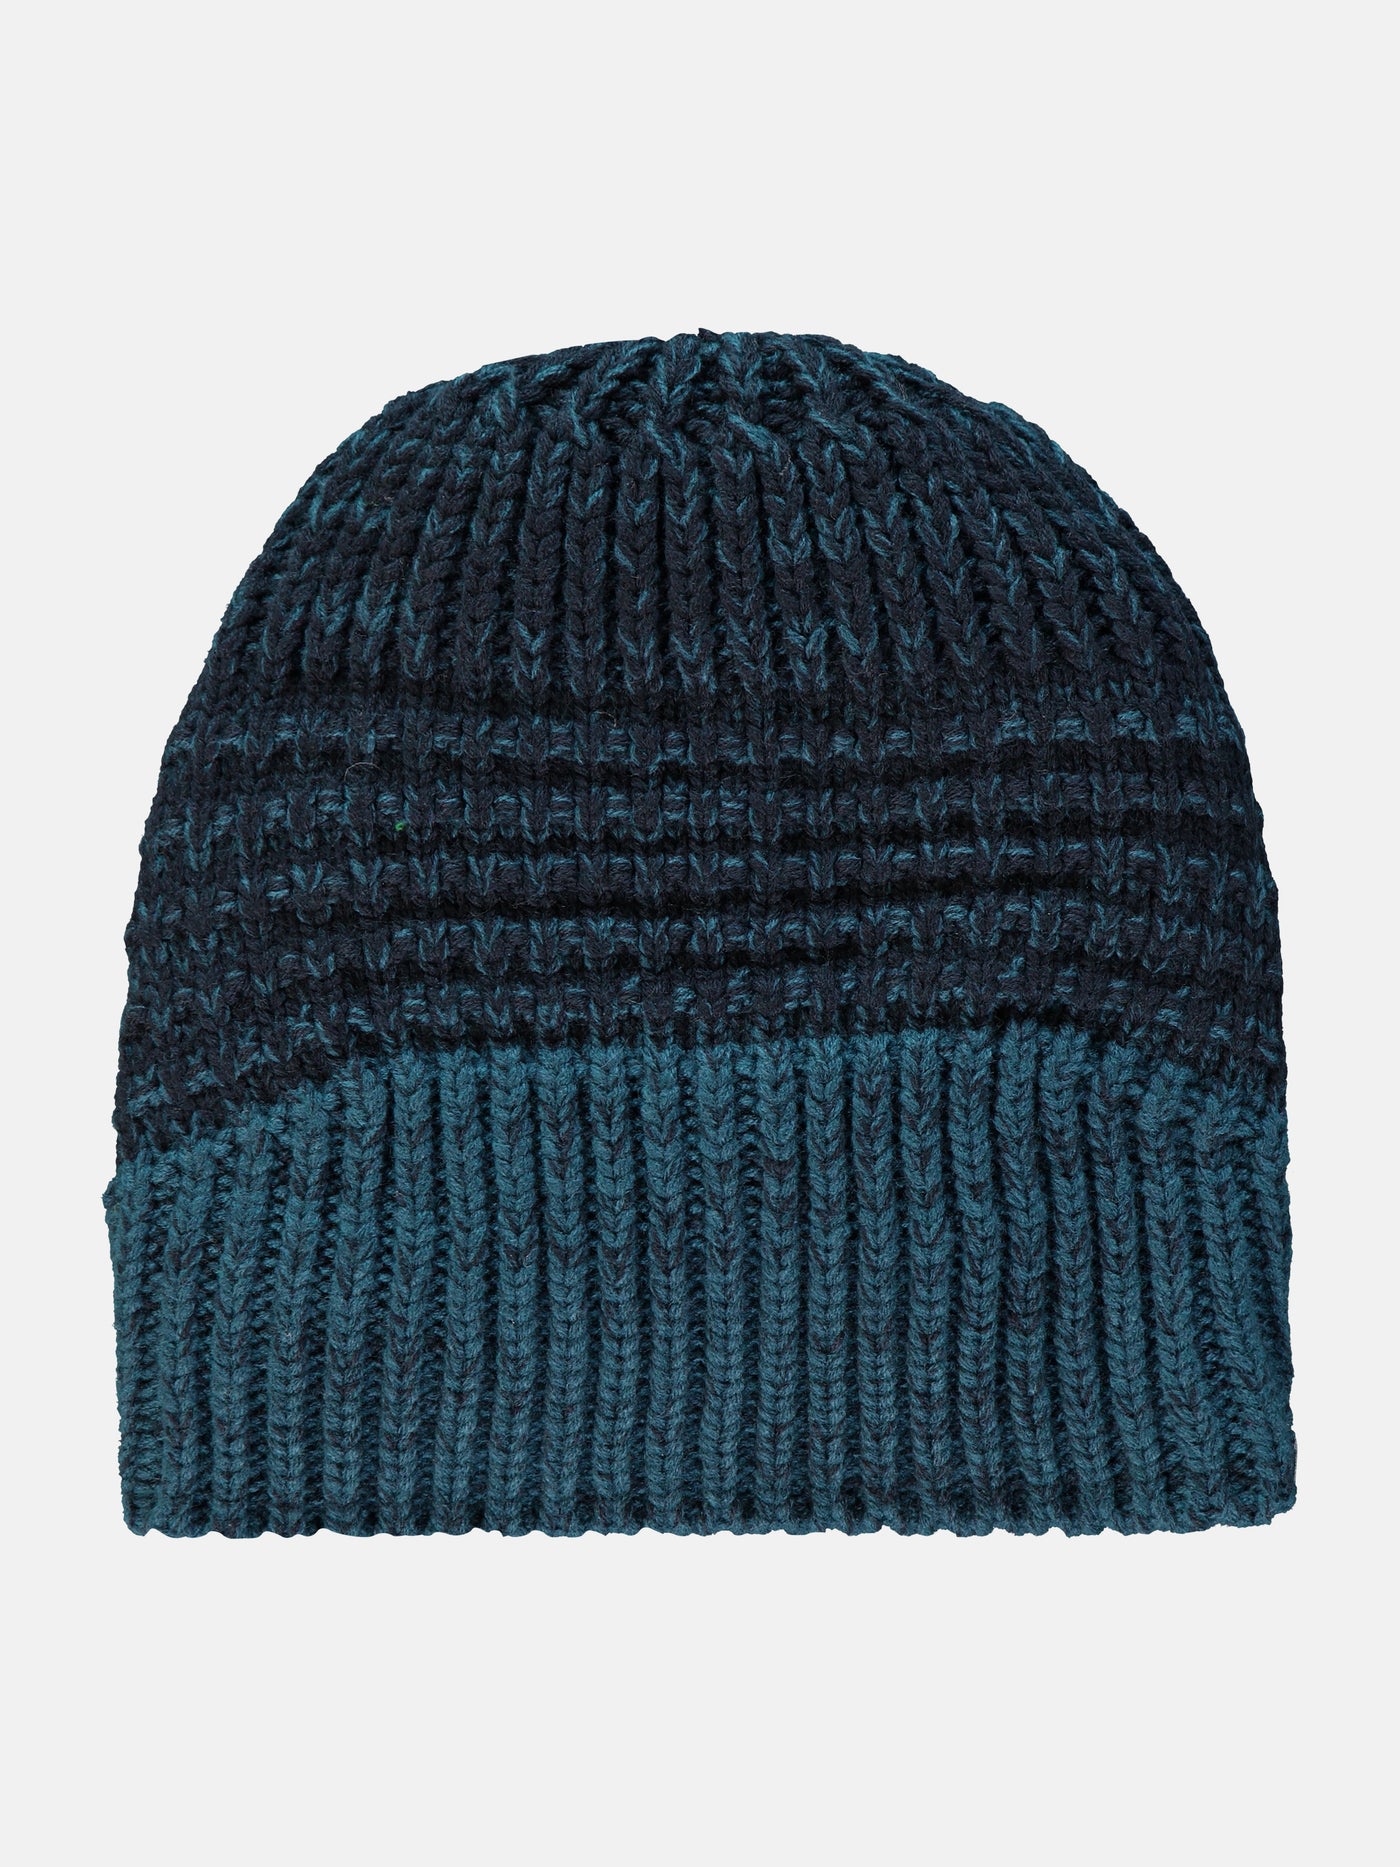 Knitted hat, chunky knit